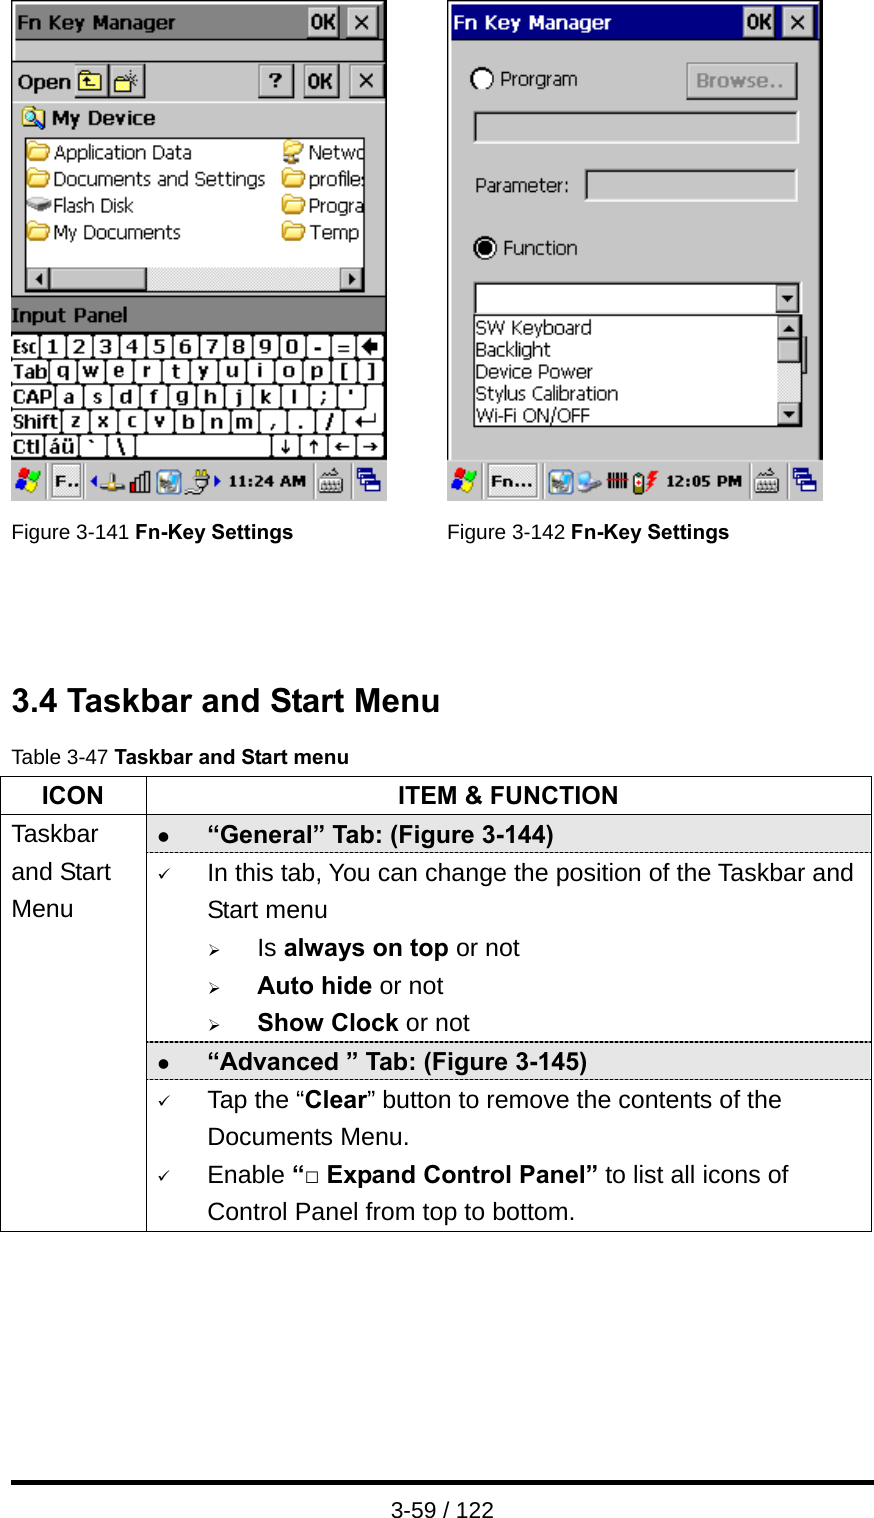  3-59 / 122    Figure 3-141 Fn-Key Settings Figure 3-142 Fn-Key Settings    3.4 Taskbar and Start Menu Table 3-47 Taskbar and Start menu ICON  ITEM &amp; FUNCTION z “General” Tab: (Figure 3-144) 9 In this tab, You can change the position of the Taskbar and Start menu   ¾ Is always on top or not ¾ Auto hide or not ¾ Show Clock or not z “Advanced ” Tab: (Figure 3-145) Taskbar and Start Menu 9 Tap the “Clear” button to remove the contents of the Documents Menu. 9 Enable “□ Expand Control Panel” to list all icons of Control Panel from top to bottom.  